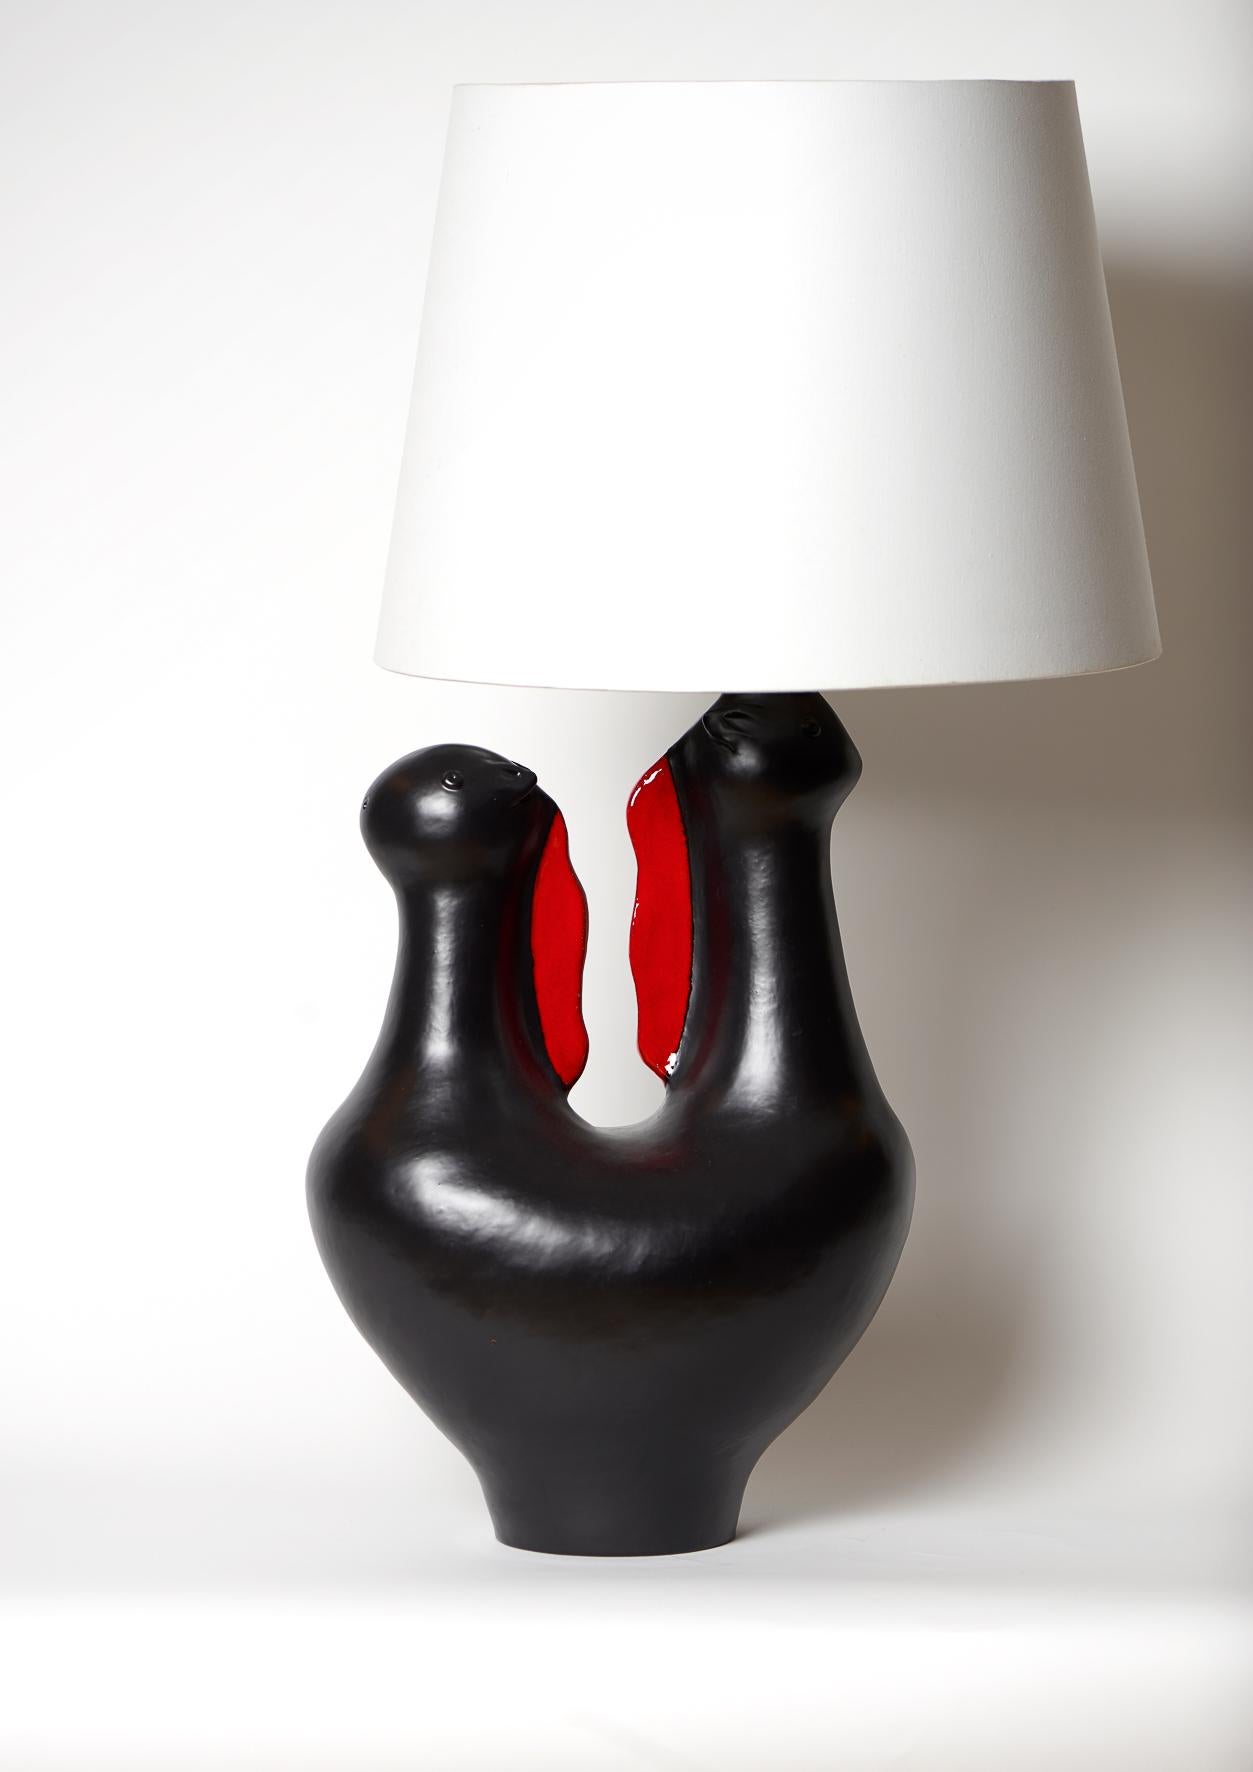 Large hand-sculpted ceramic sculpture or lamp base, stoneware glazed in mat black and shiny red enamel 
One of a kind signed by the French ceramicists Dalo. 
The height dimension is for the ceramic sculpture solely

Note to international